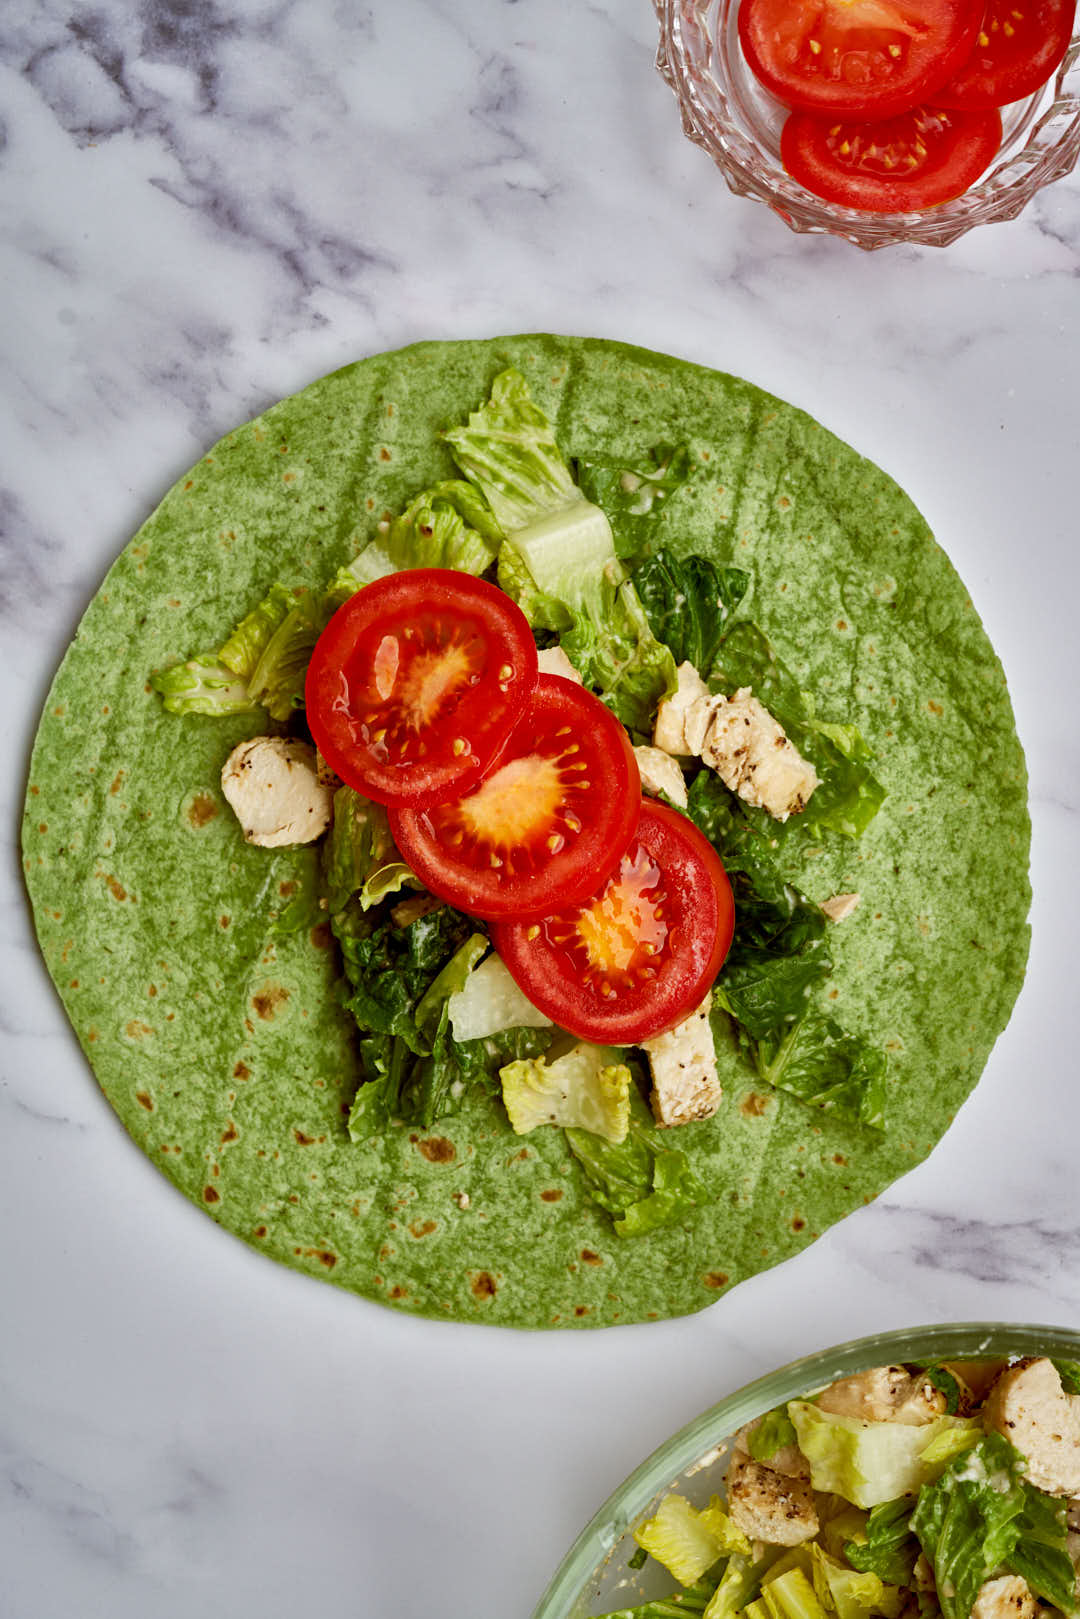 Red tomato, diced chicken, lettuce, and dressing on top of a green wrap.